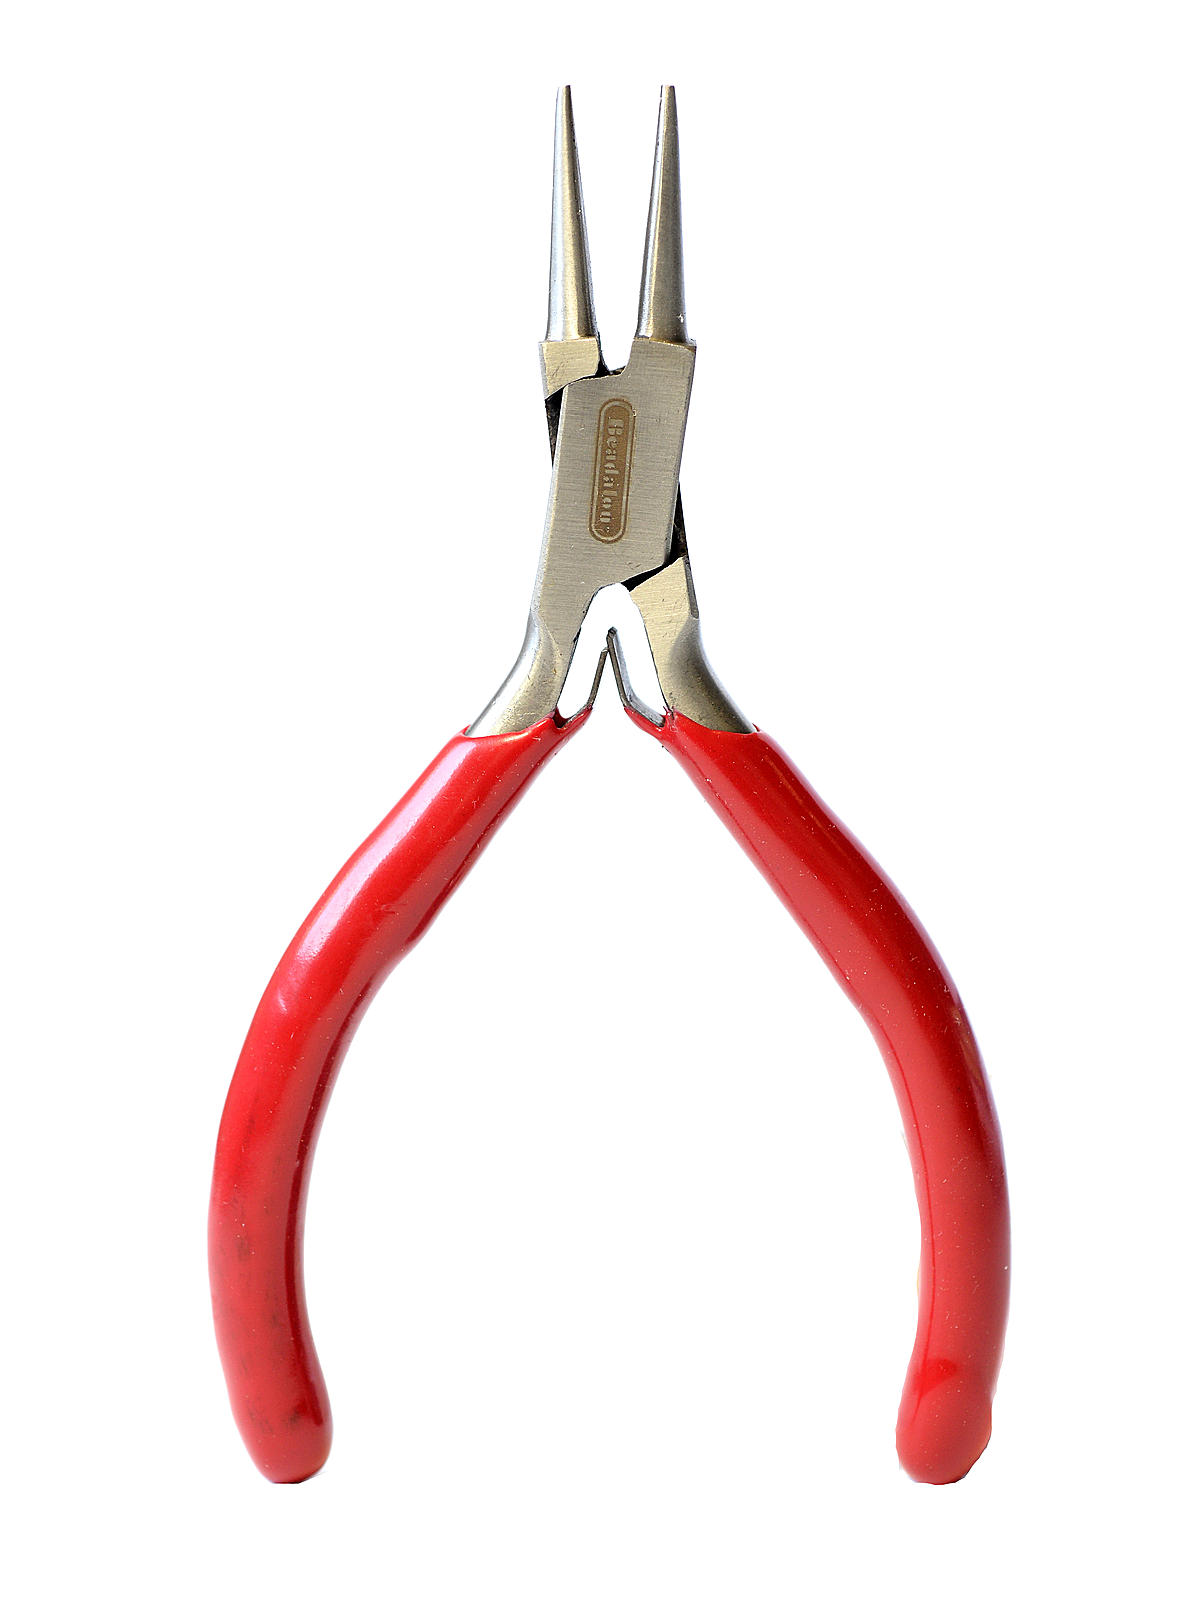 Chain, Flat, Or Round Nose Pliers Round Nose